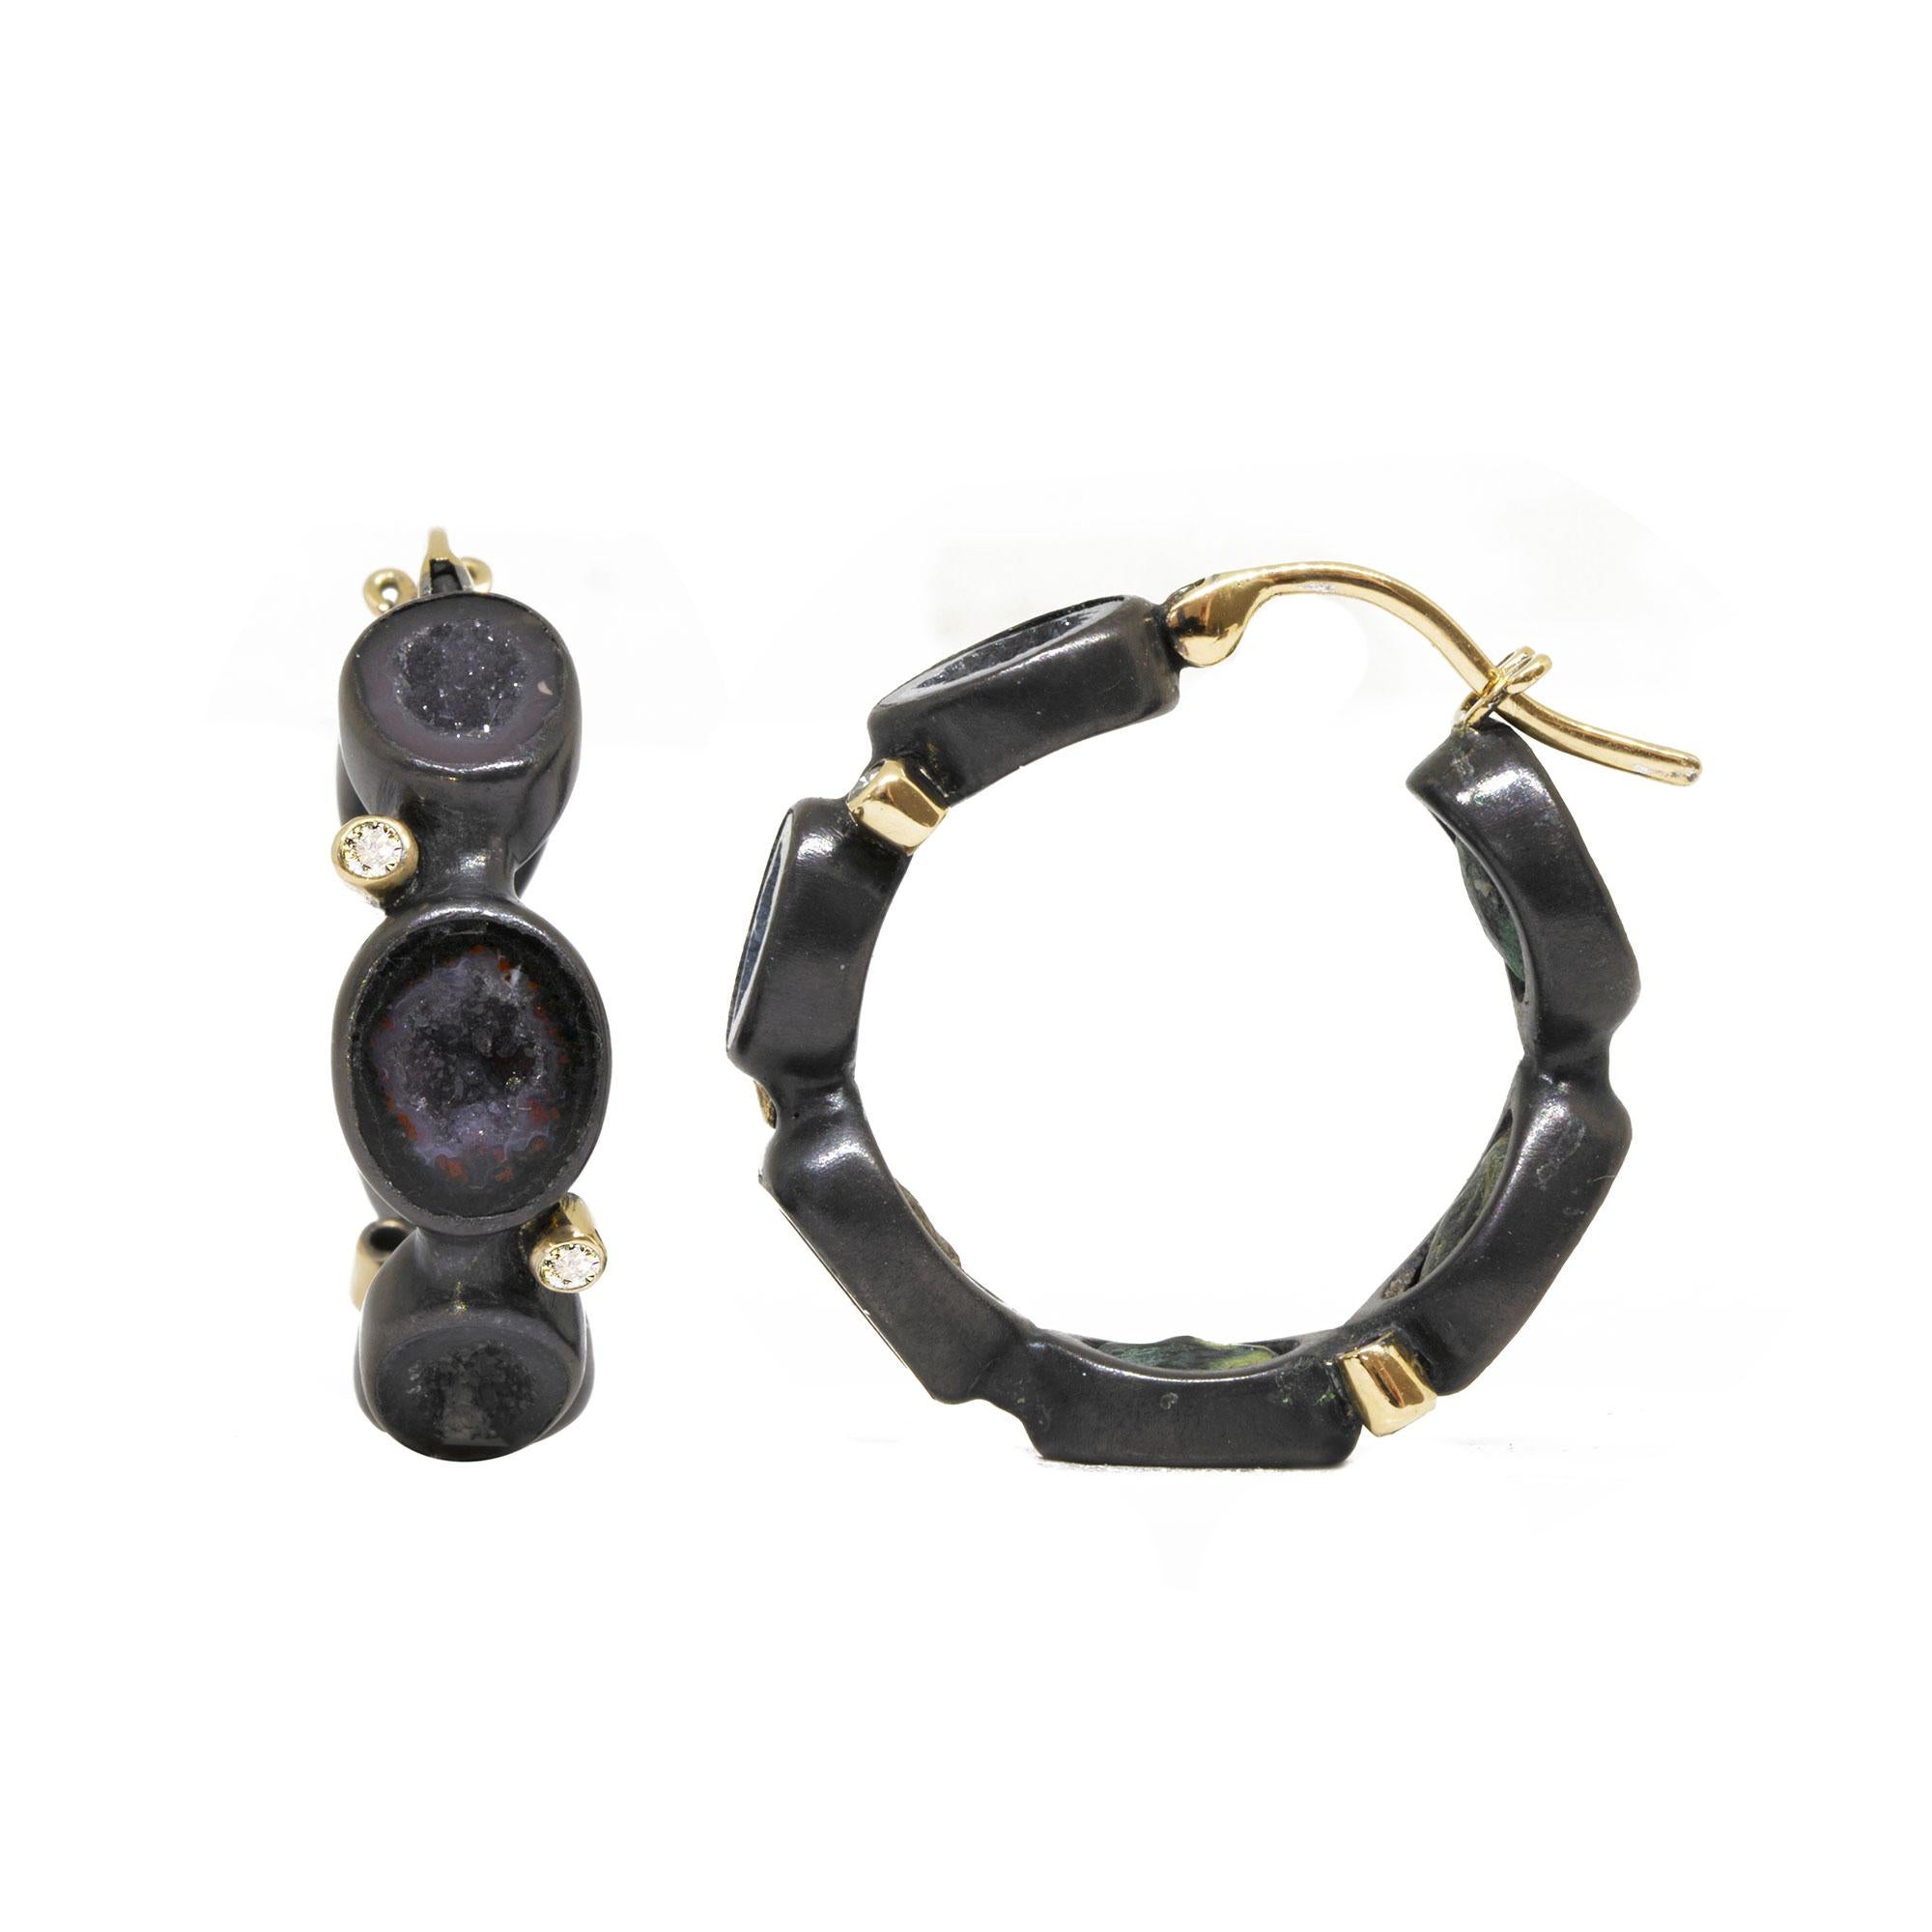 Gorgeous black geodes form the Around The World Geode Silver Hoop Earrings, which bring a mysterious, organic edge to your look. To make them feel extra luxe—and pop on the ear—we added tiny diamond accents set in 18k yellow gold. Wear these silver